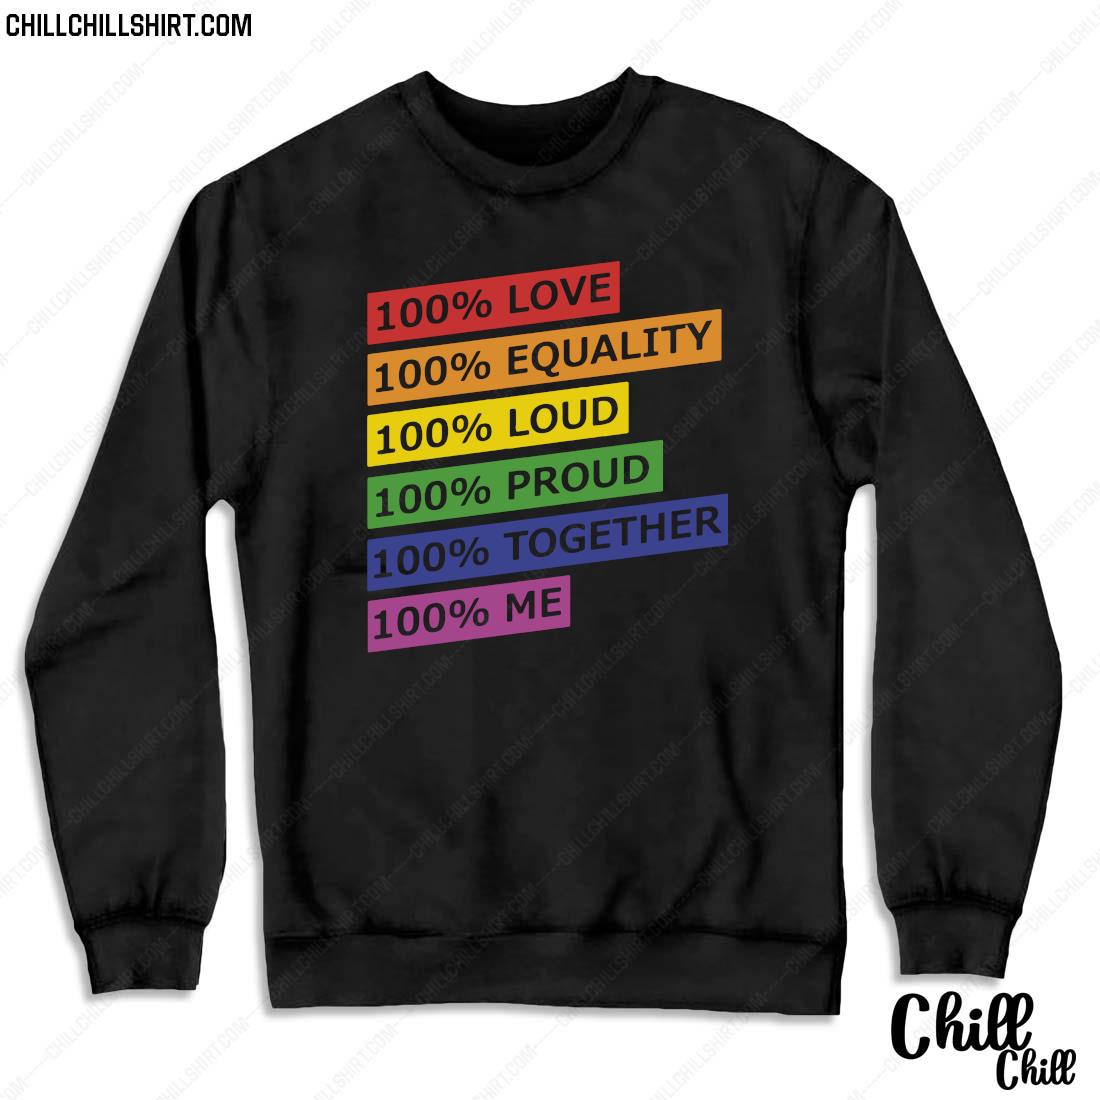 100 Love Equality Loud Proud Together Me Shirt Sweater